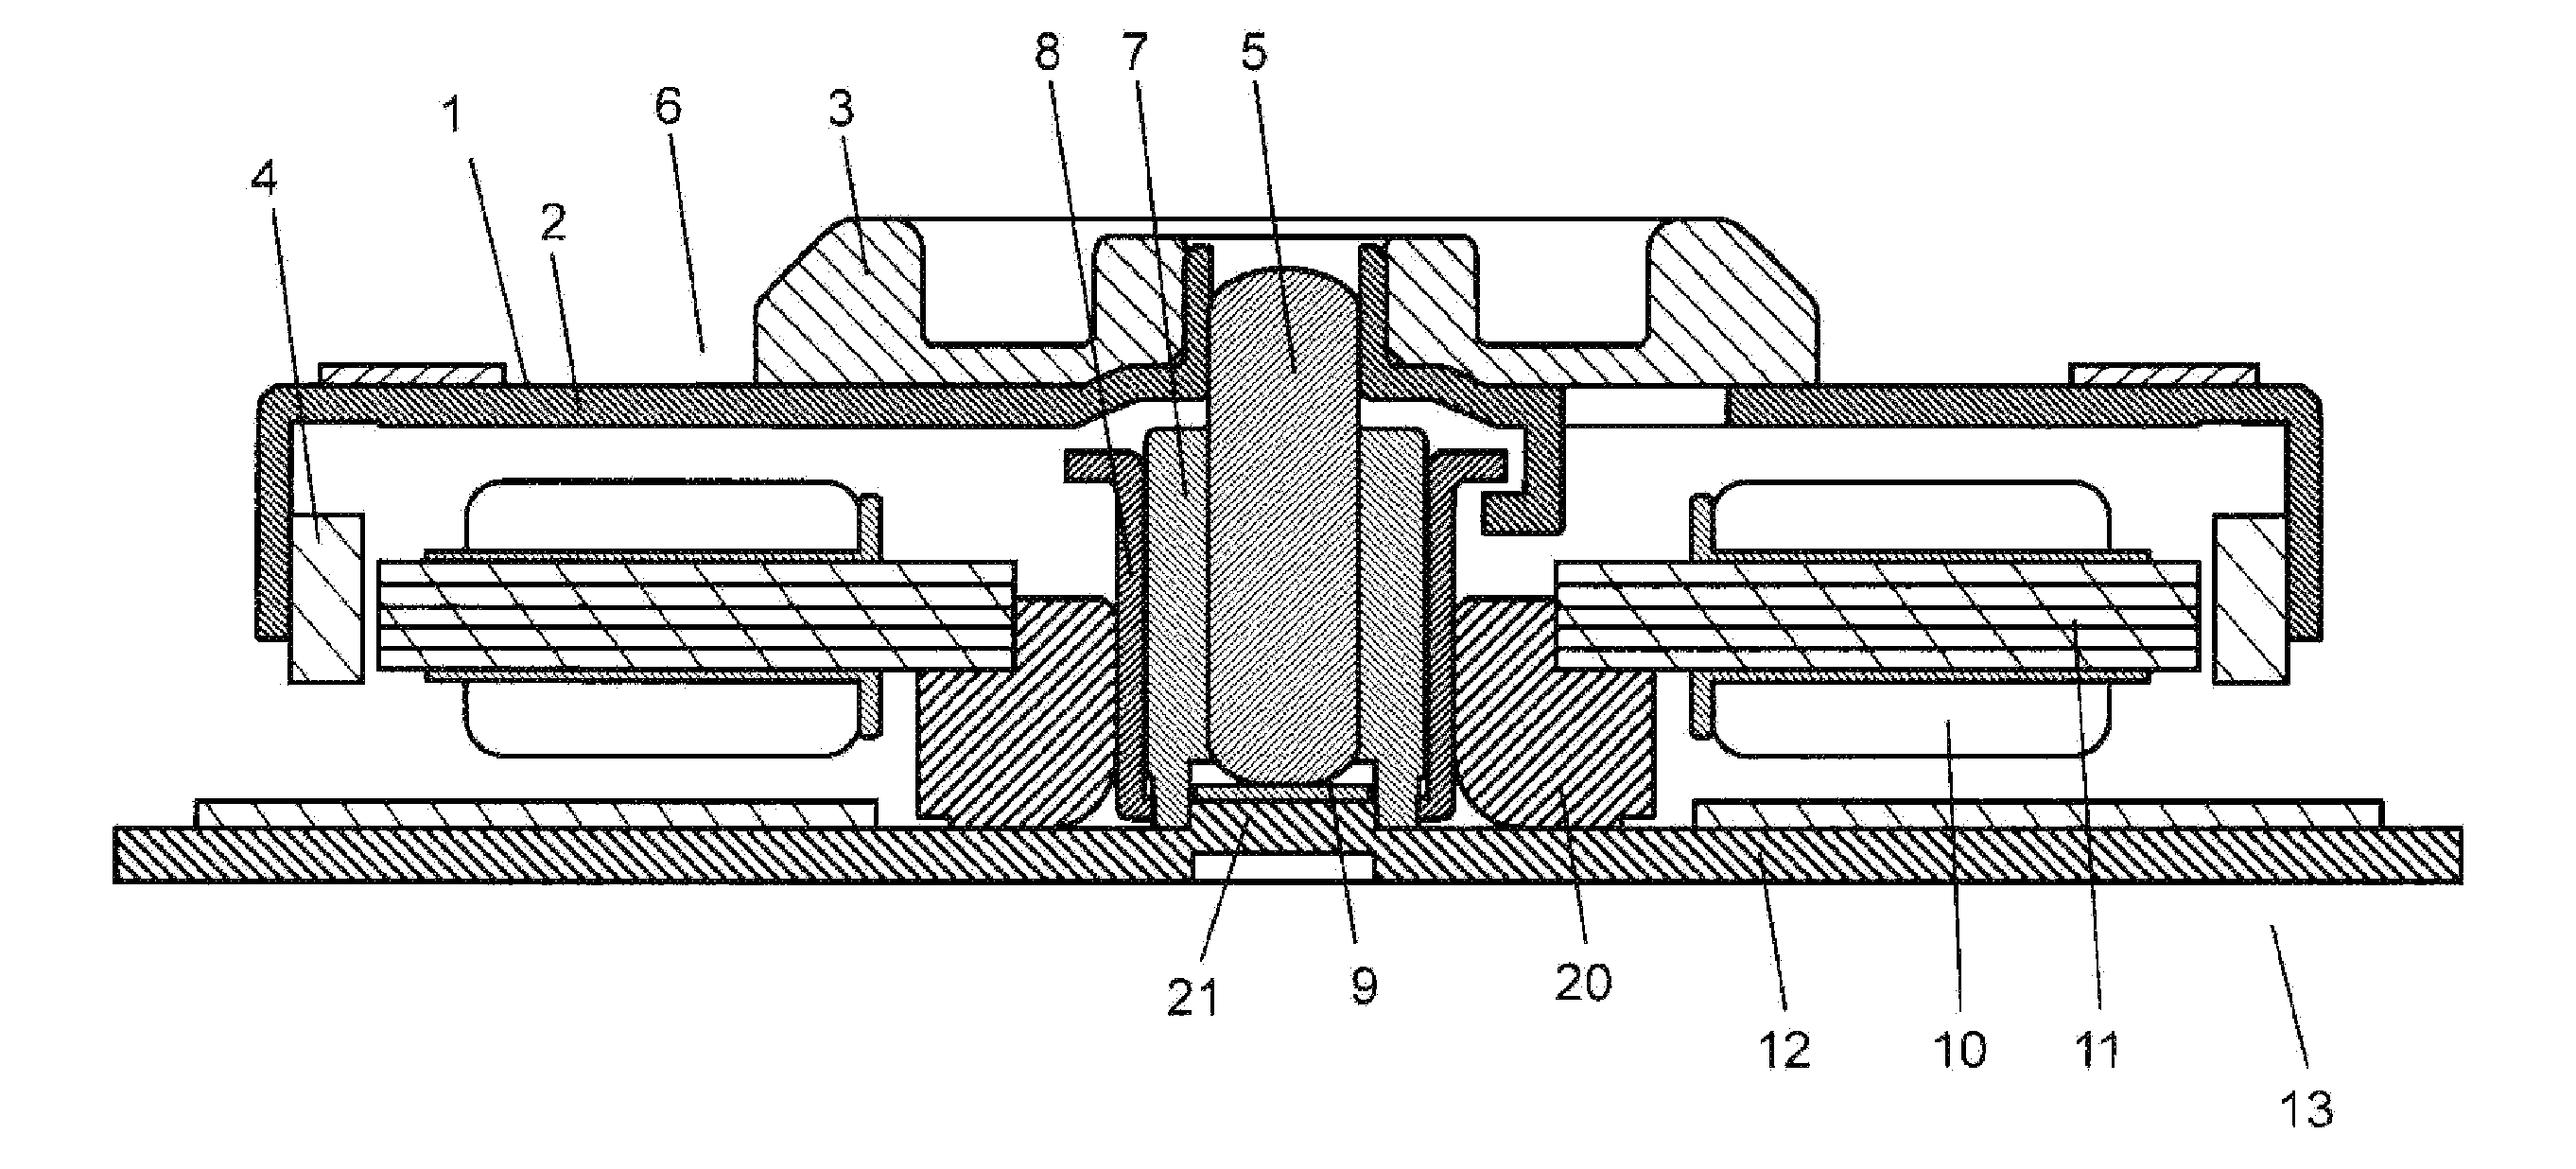 Disk-rotating motor and disk-driving device